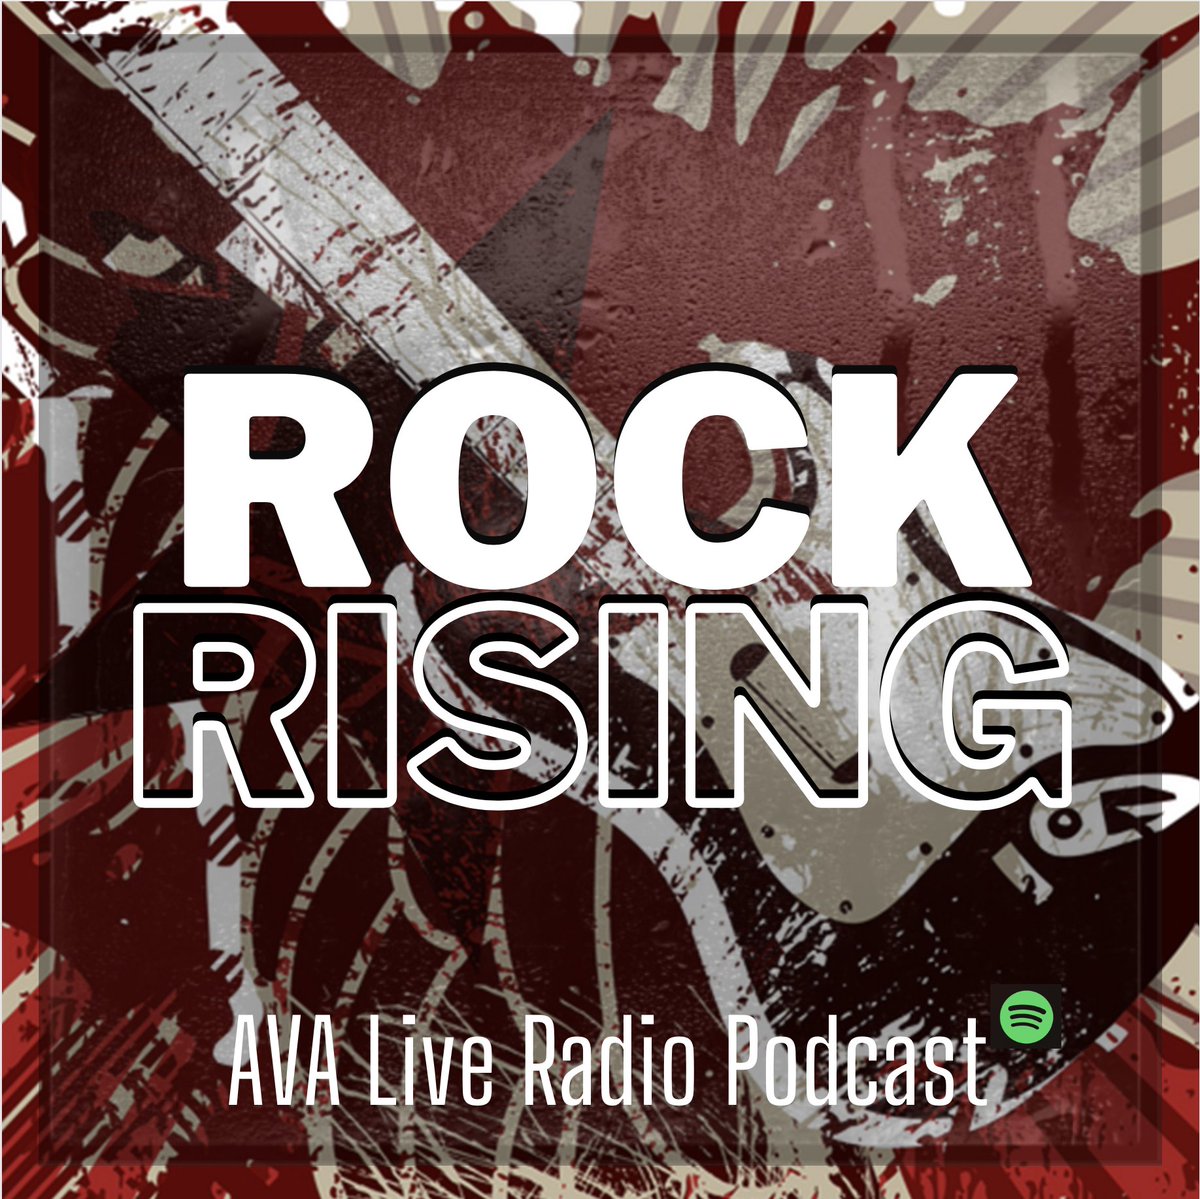 AVA Live Radio @JacquelineJax puts an unfiltered provocative spin on new music and what’s behind the releases. This is what’s happening in indie rock today as of November 2022. open.spotify.com/episode/7ACSfo… @thegreghoy @therefusers @band_shameless @moderndayoutla1 @CabelaSchmitt